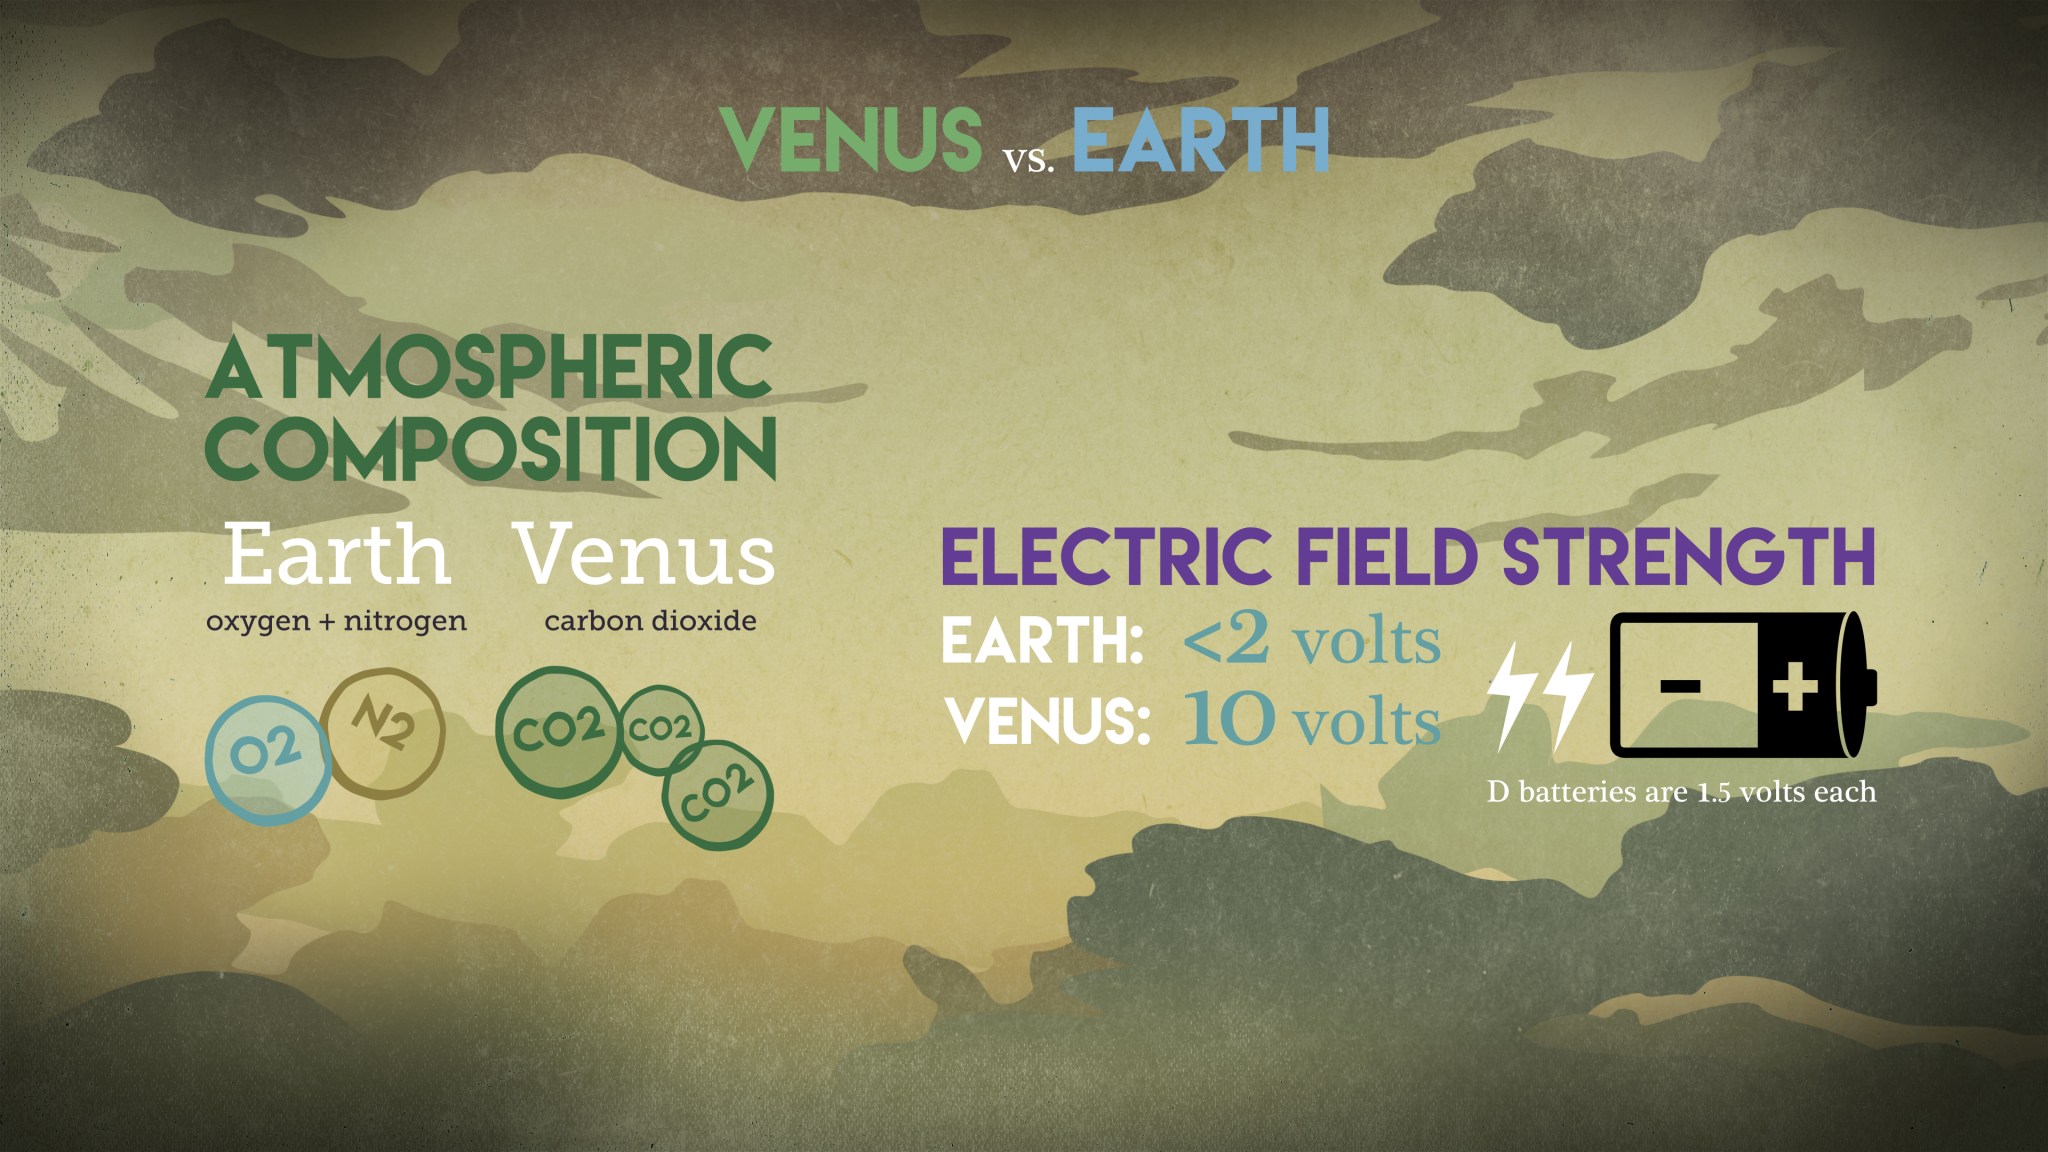 This graphic compares the atmospheric composition and electric field strength on Earth and Venus.